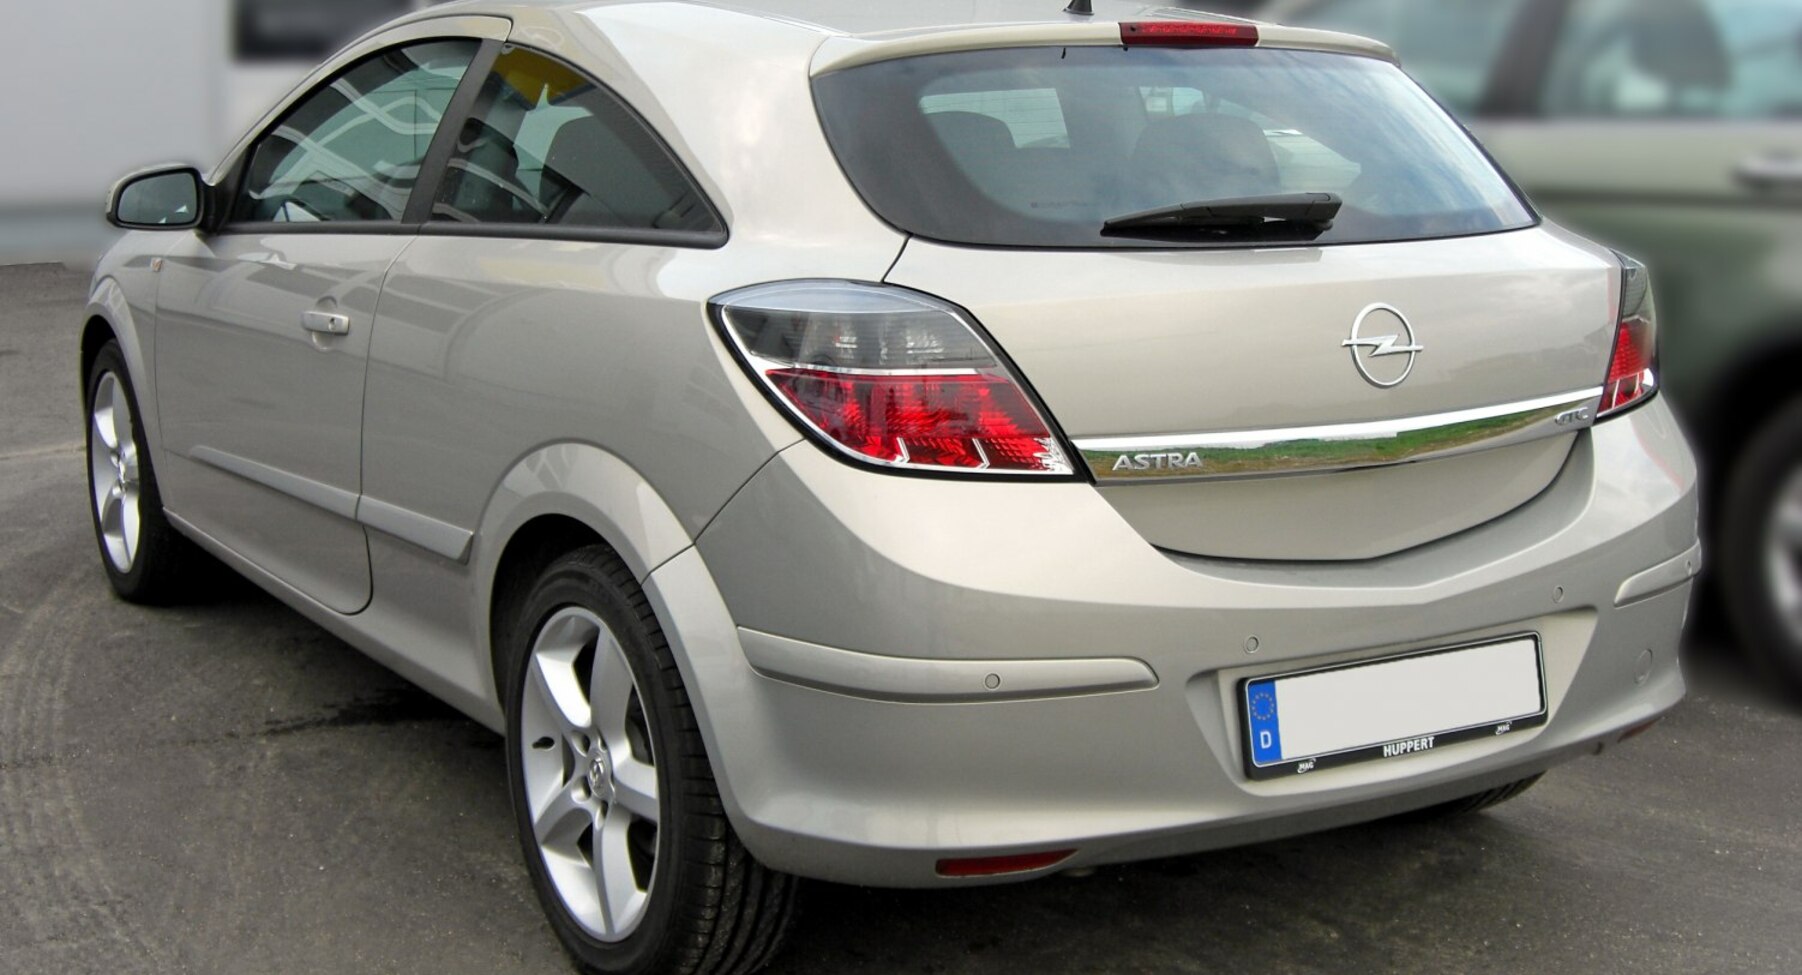 Opel Astra H GTC 1.8i (140 Hp) Automatic 2005, 2006, 2007, 2008